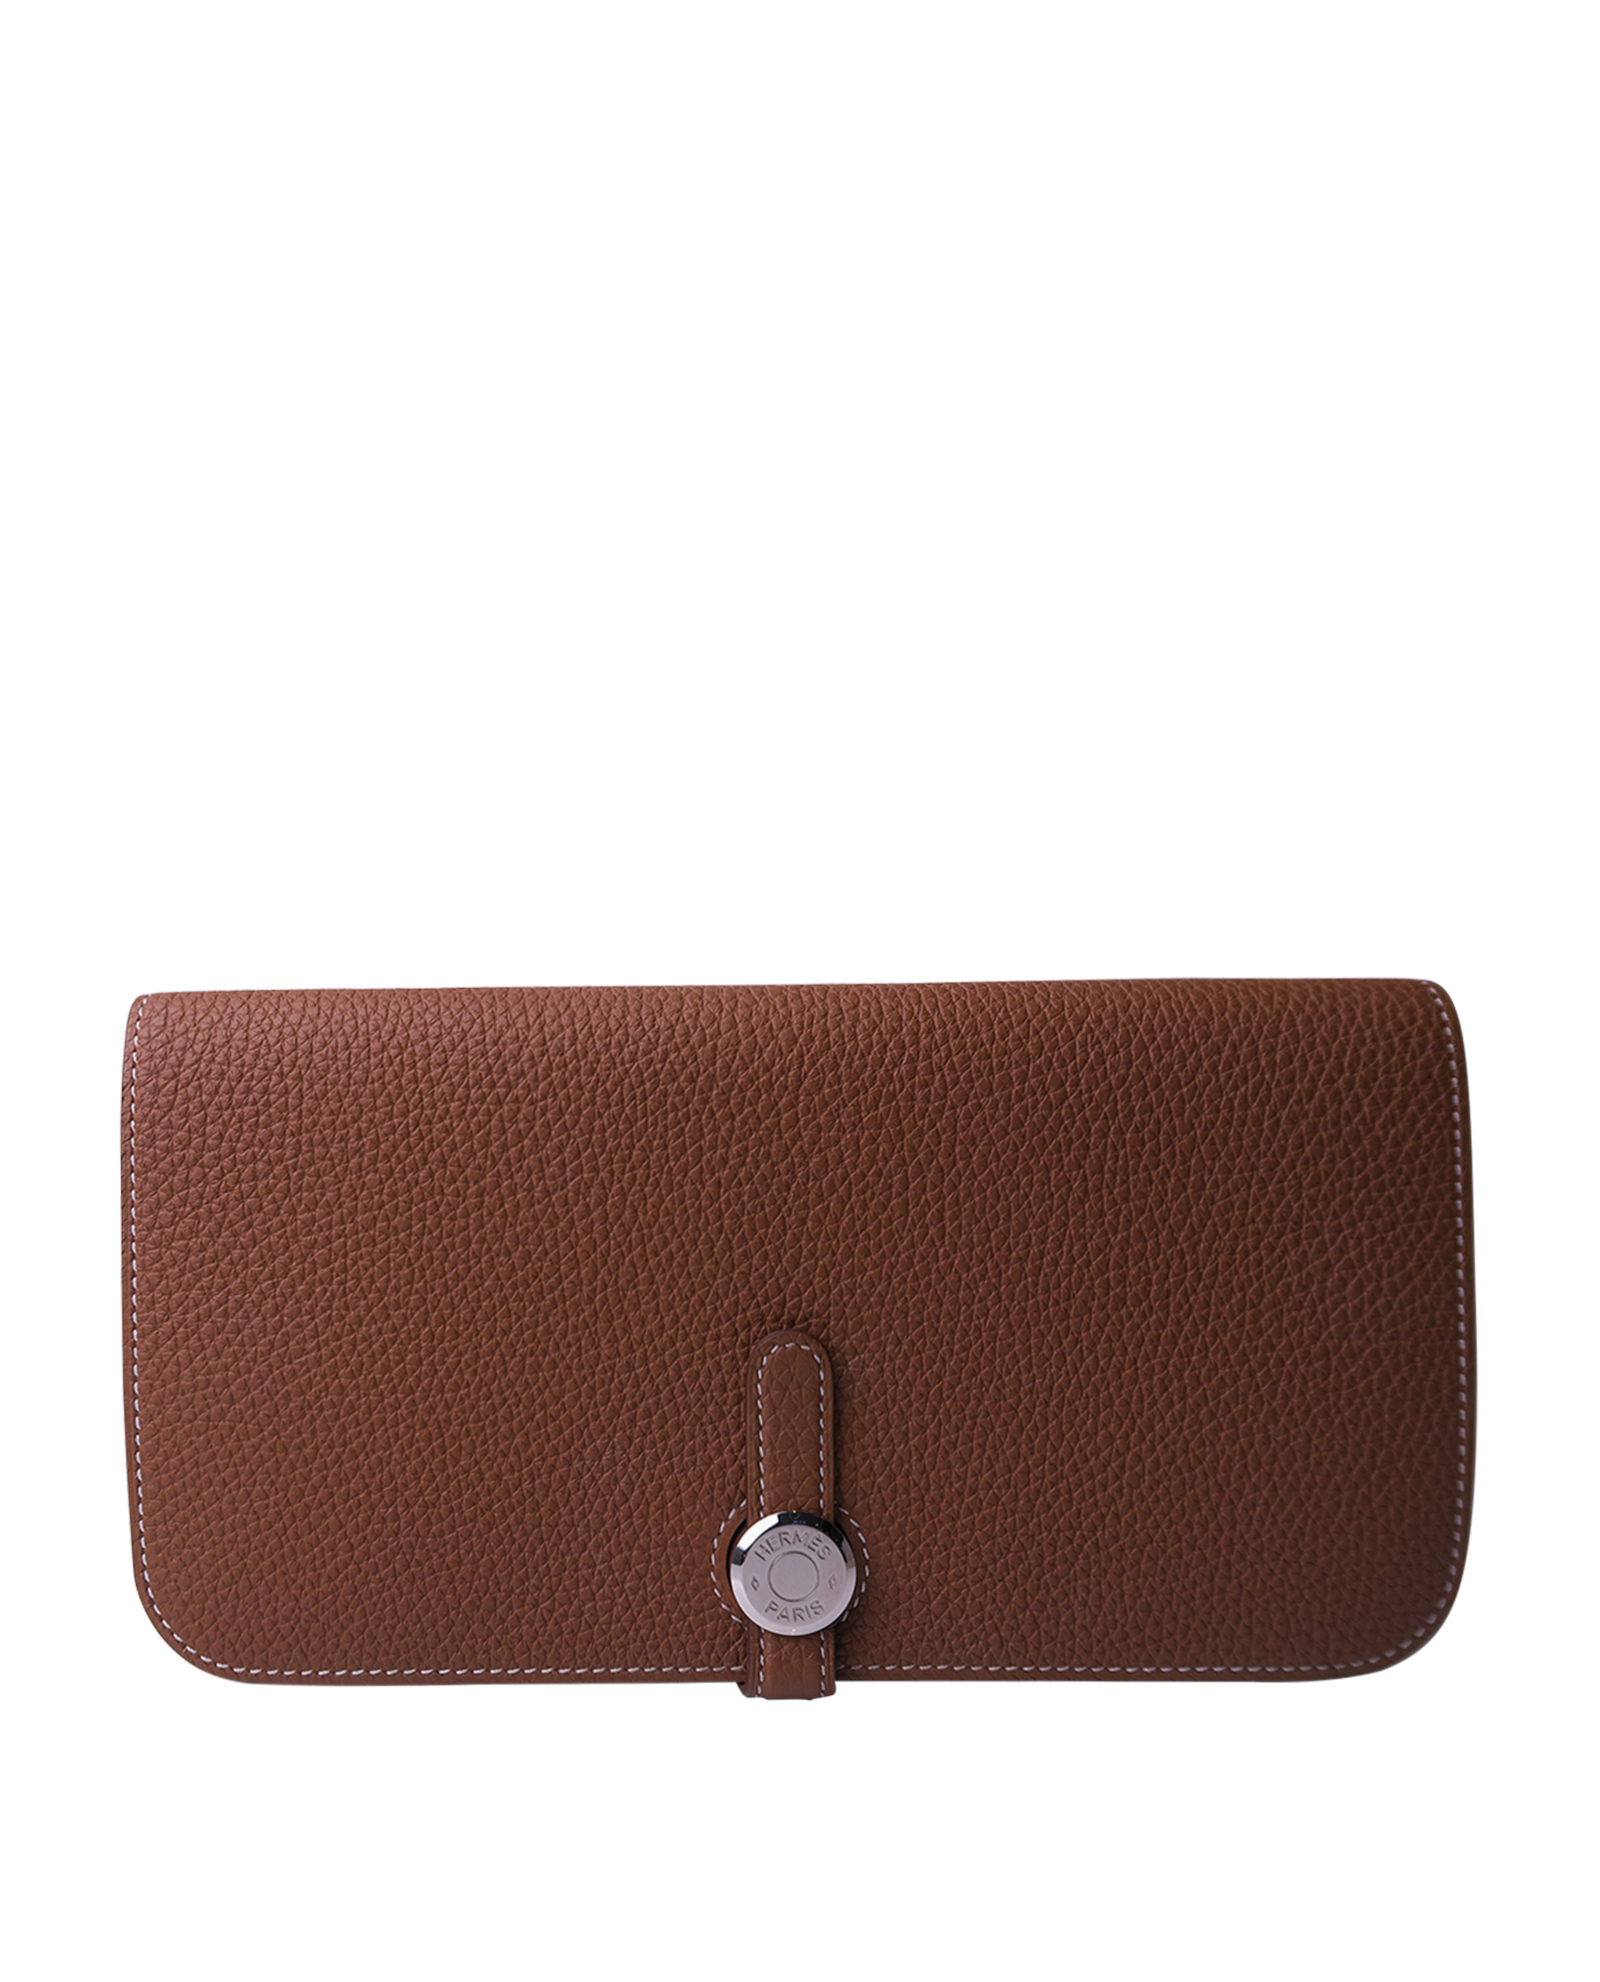 Hermes Dogon Recto Verso Wallet Leather